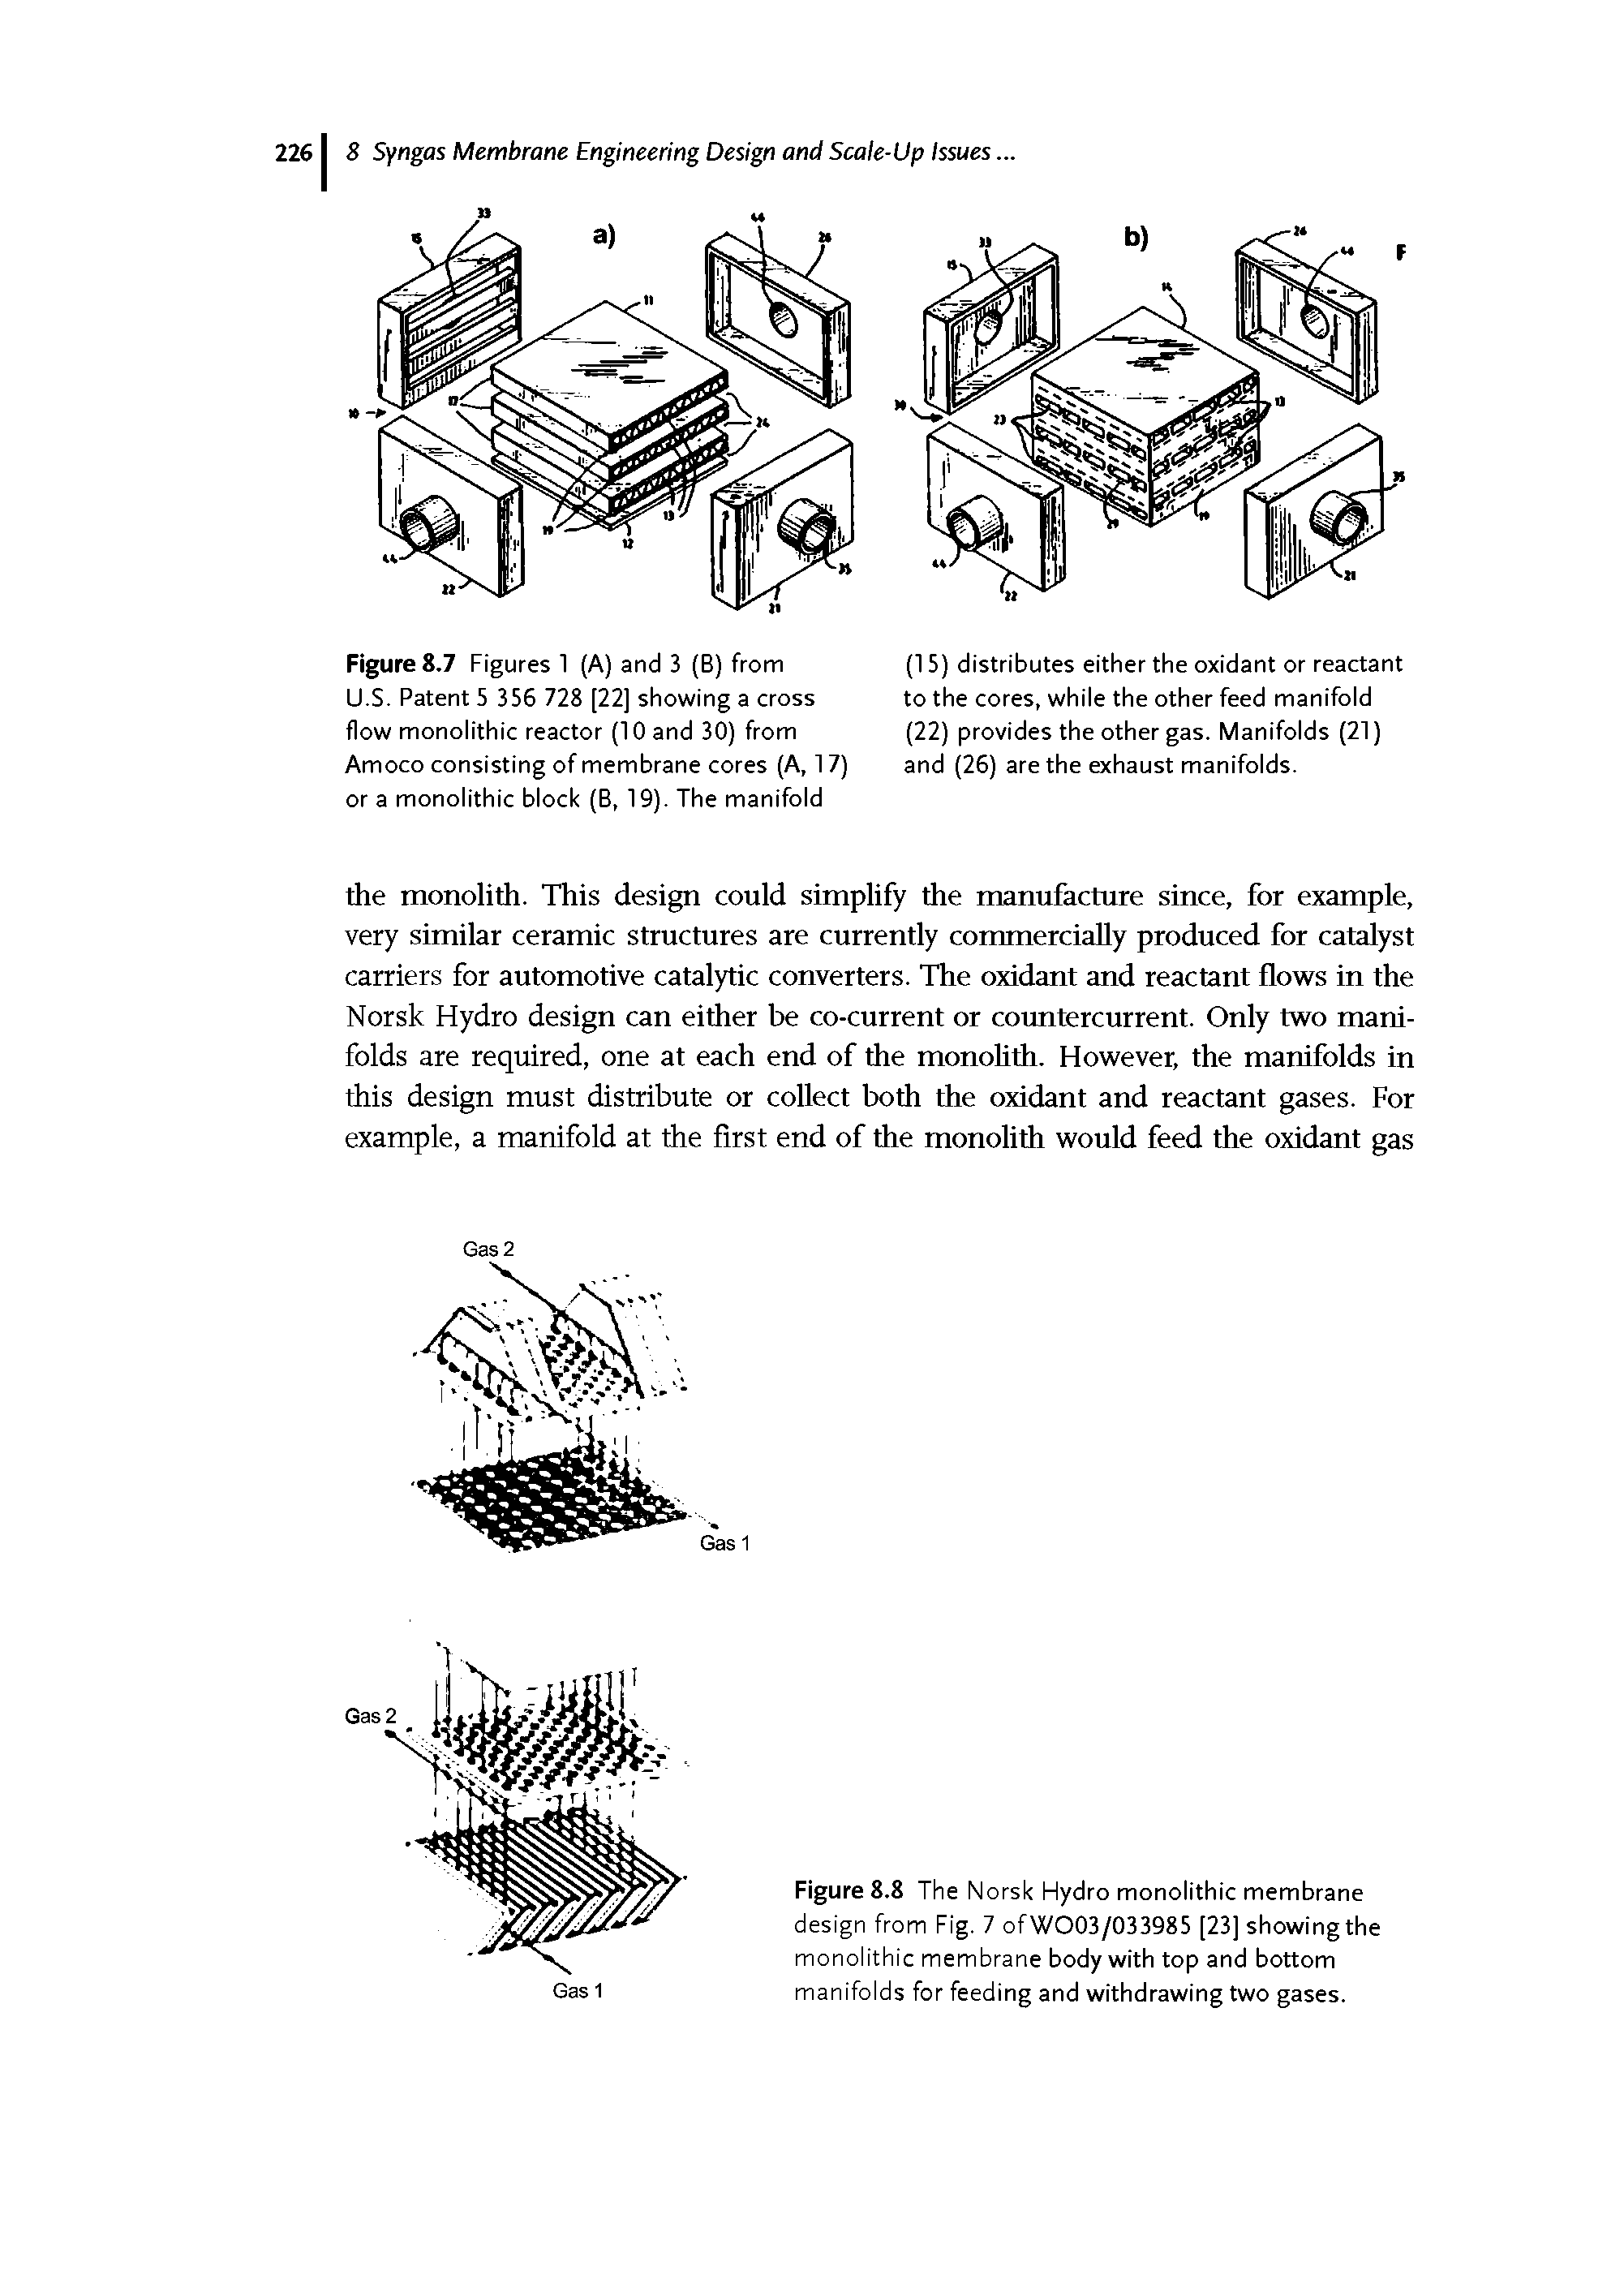 Figure 8.7 Figures 1 (A) and 3 (B) from U.S. Patent 5 356 728 [22] showing a cross flow monolithic reactor (10 and 30) from Amoco consisting of membrane cores (A, 17) or a monolithic block (B, 19). The manifold...